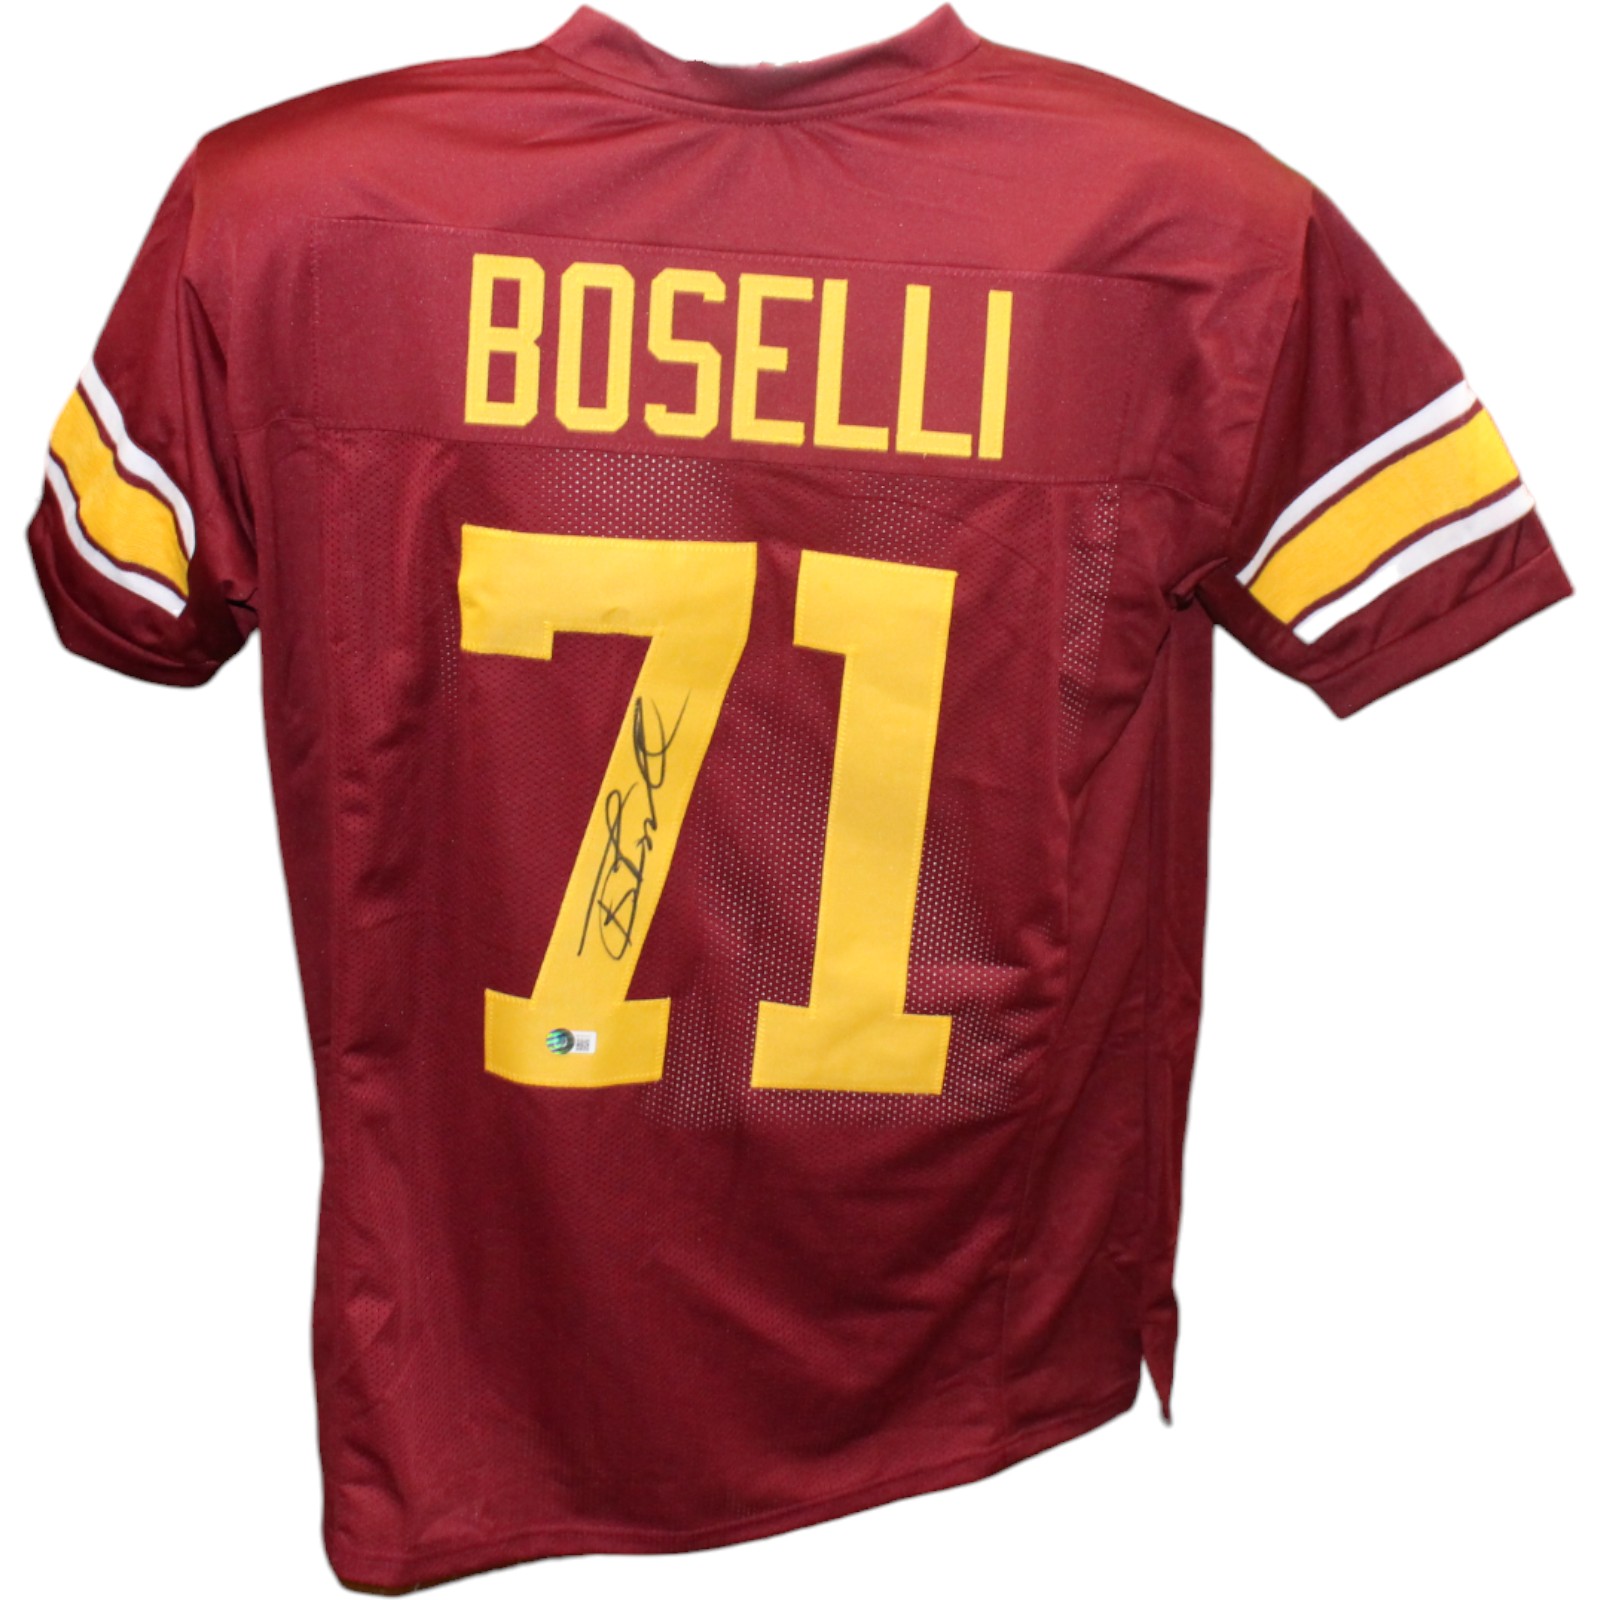 Tony Boselli Autographed/Signed College Style Red Jersey Beckett